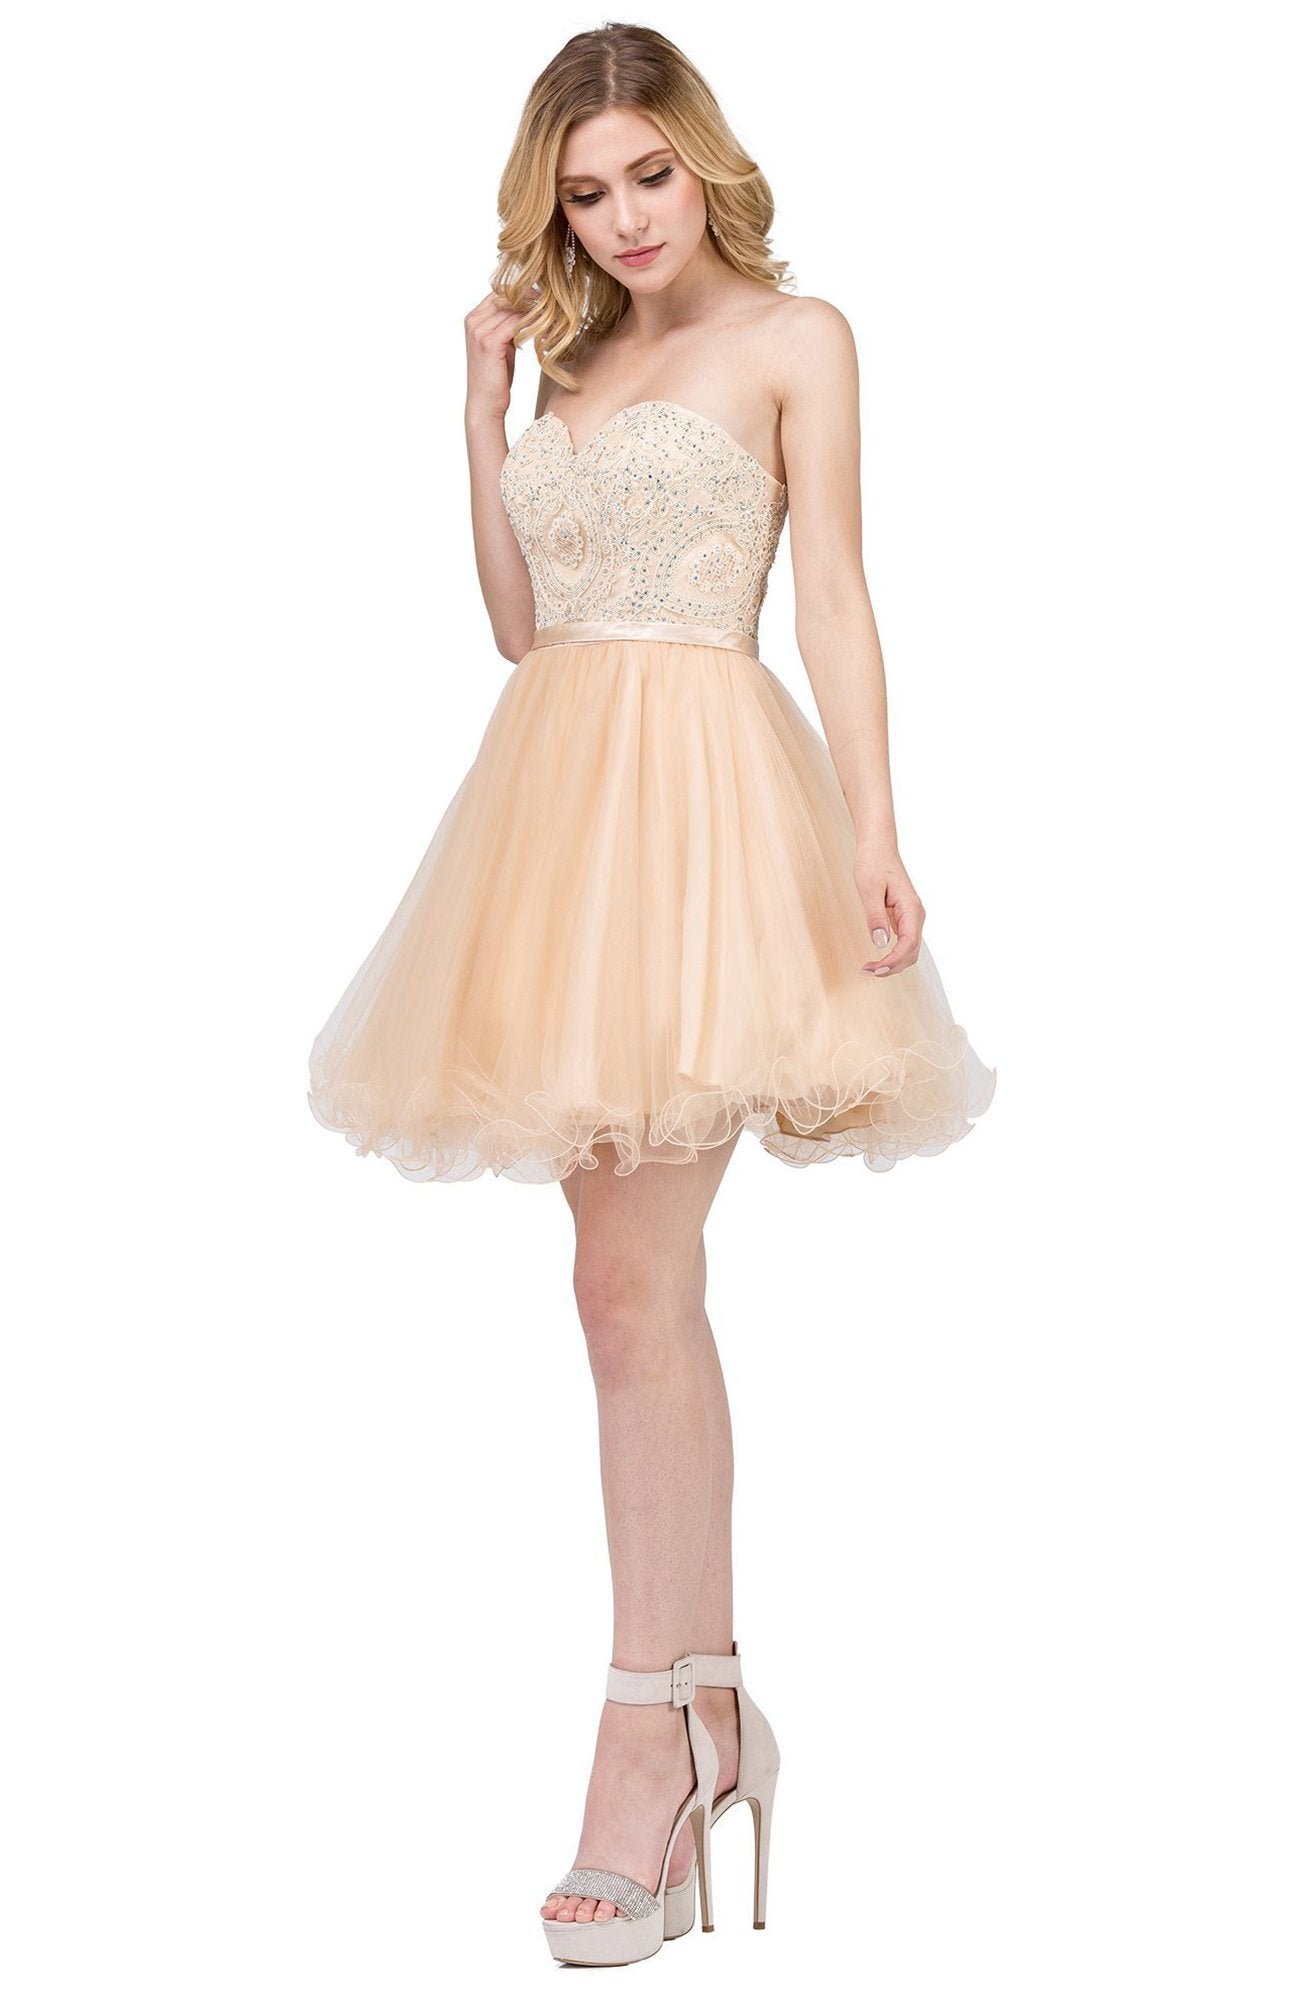 Dancing Queen - 3014 Strapless Embellished Sweetheart Homecoming Dress In Nude